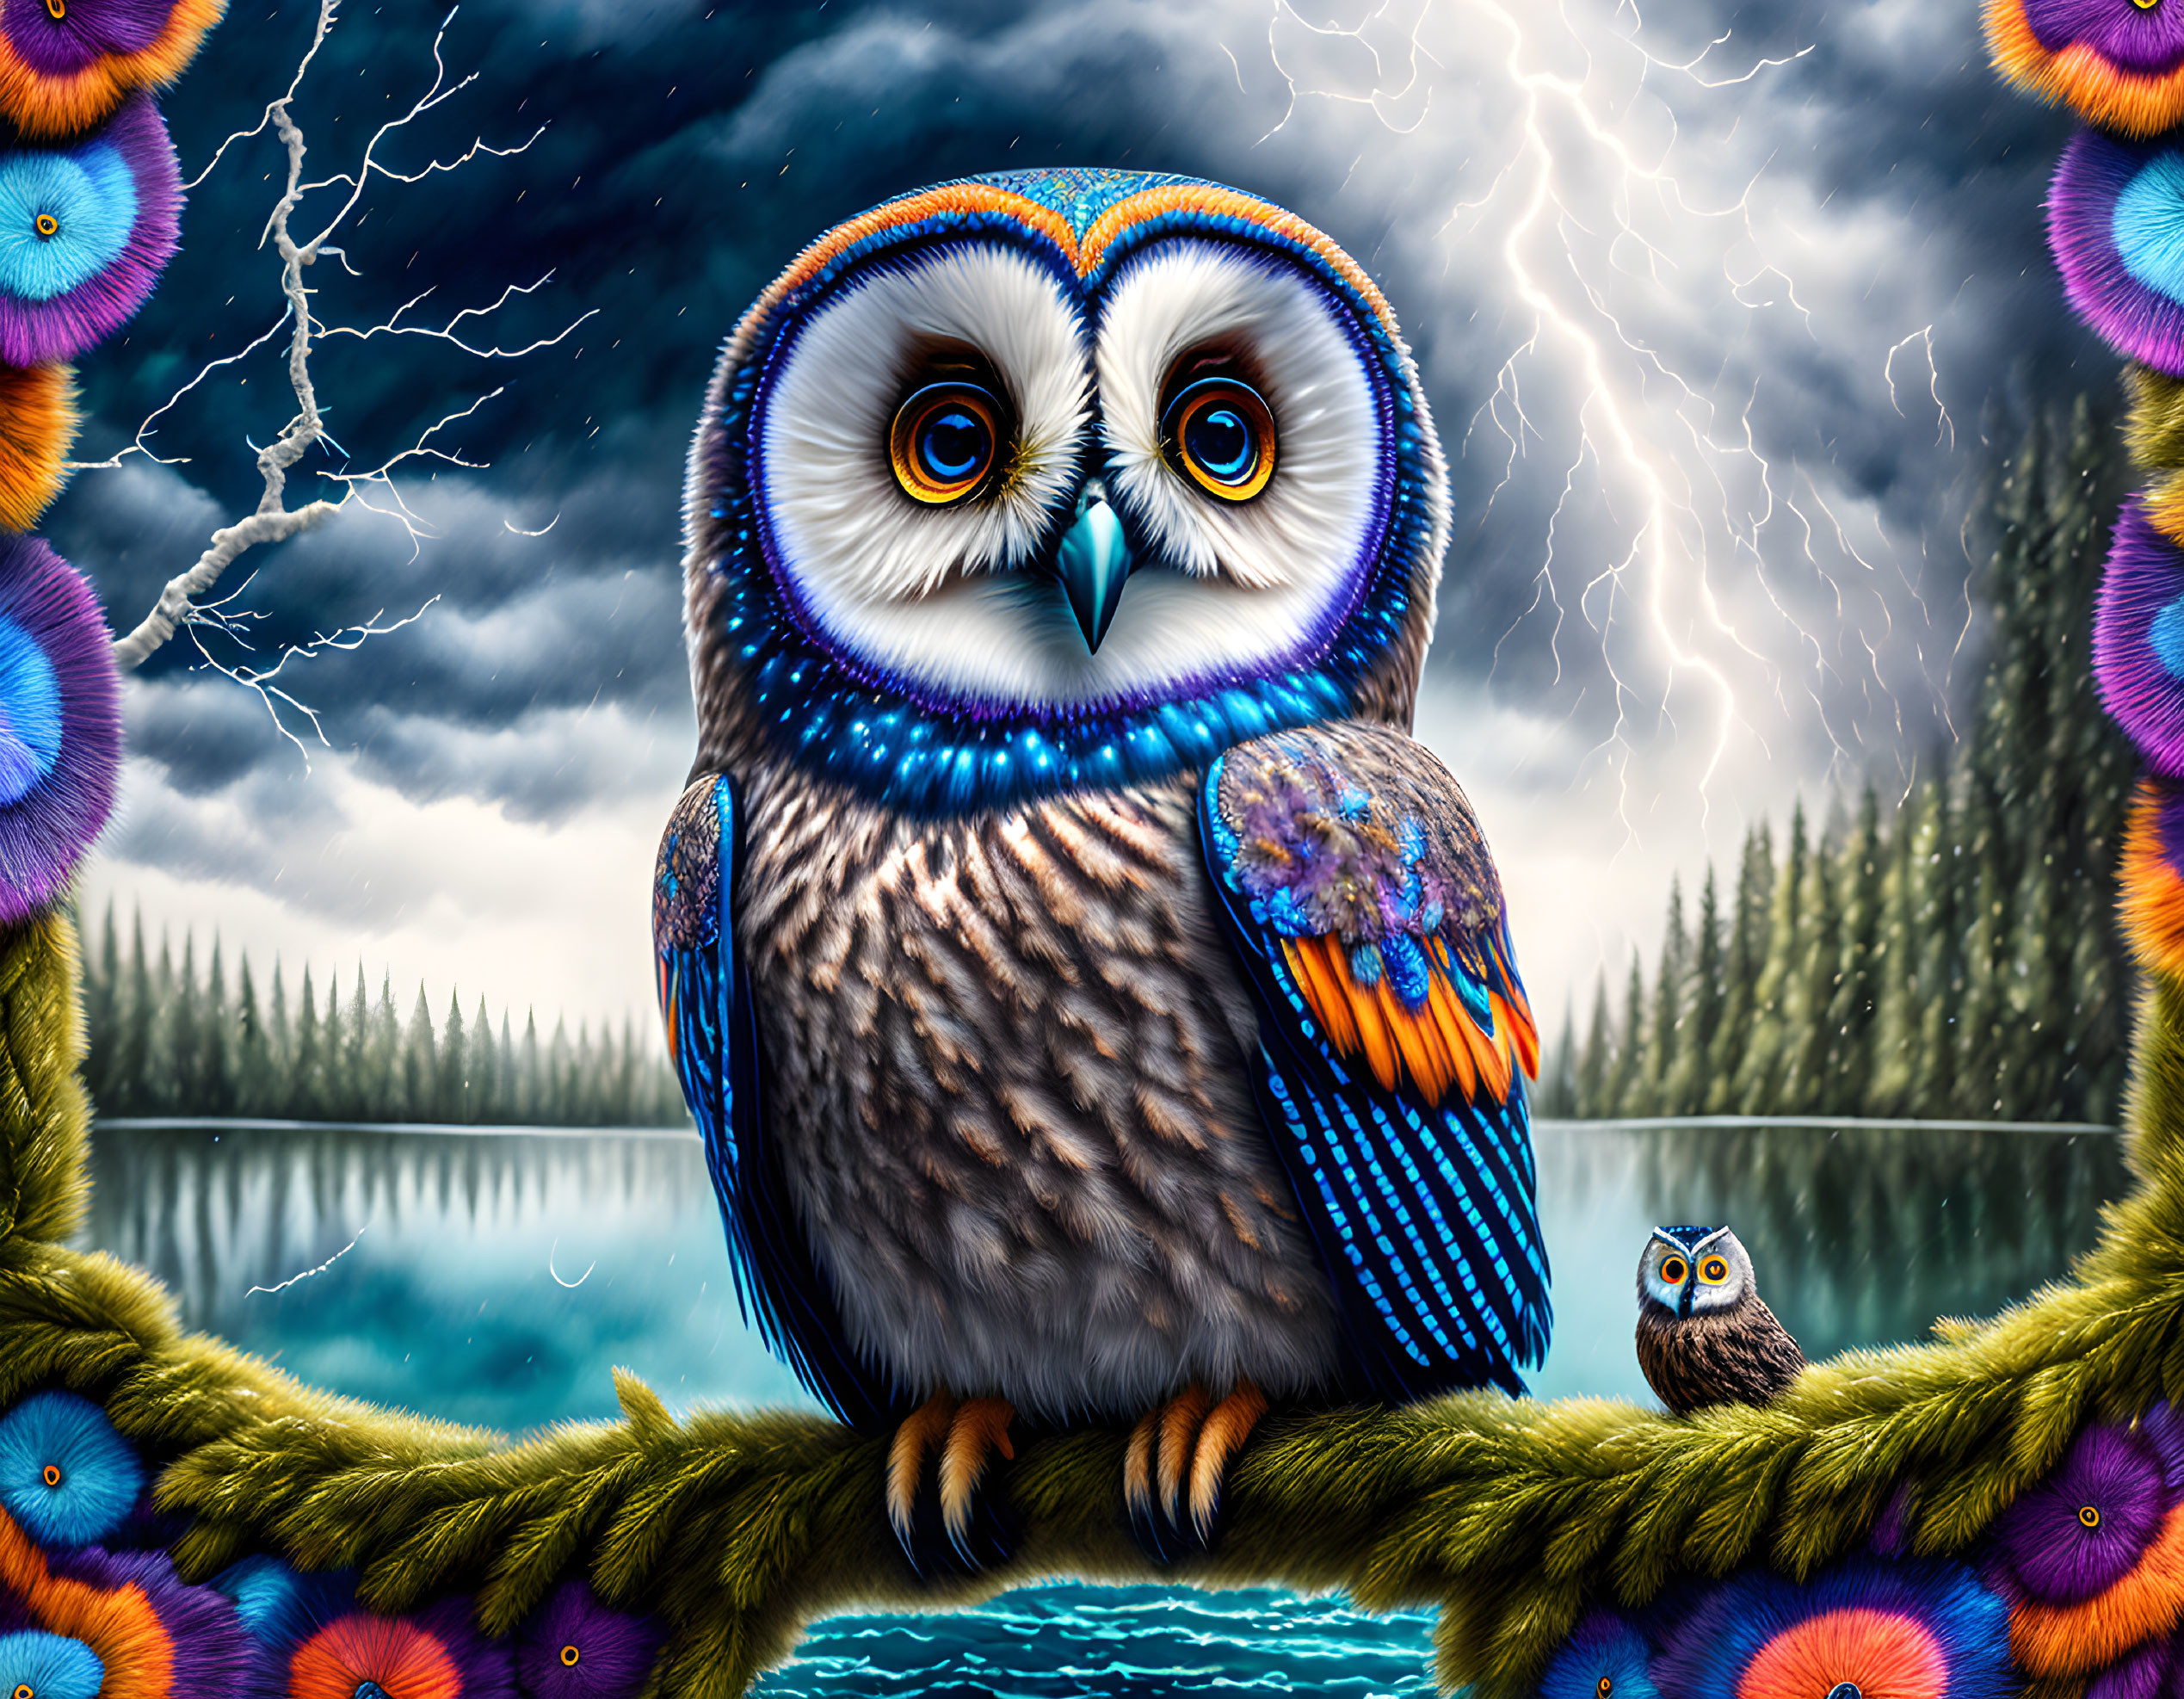 Beautiful Owl in Stormy Weather